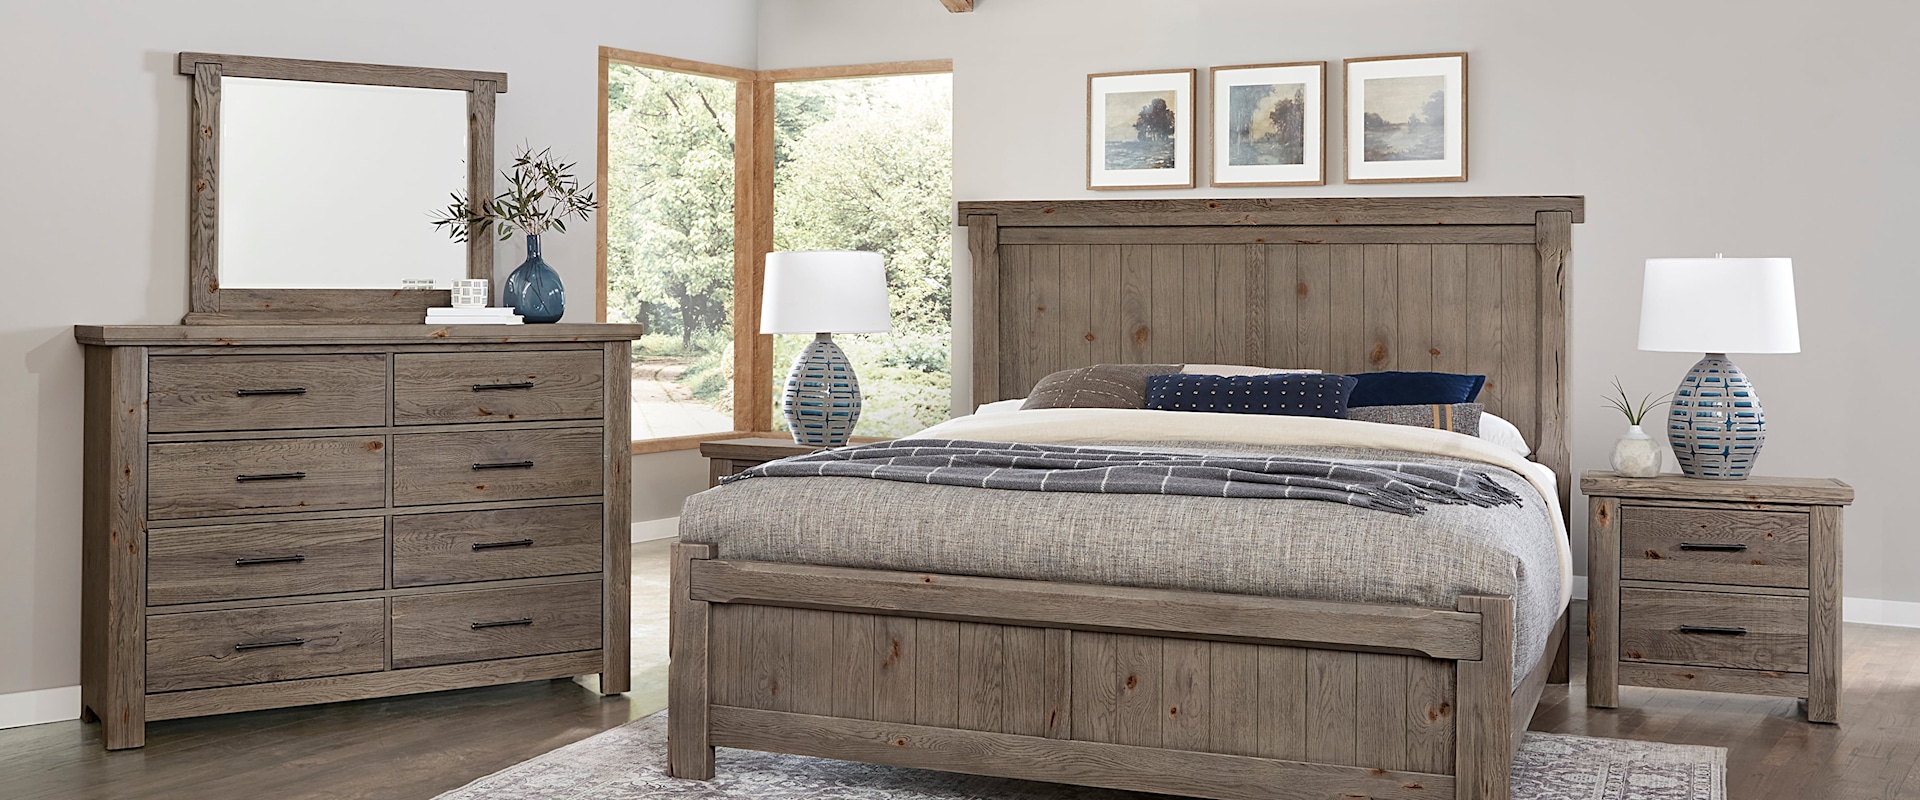 Transitional Rustic 5-Piece California King Dovetail Bedroom Set